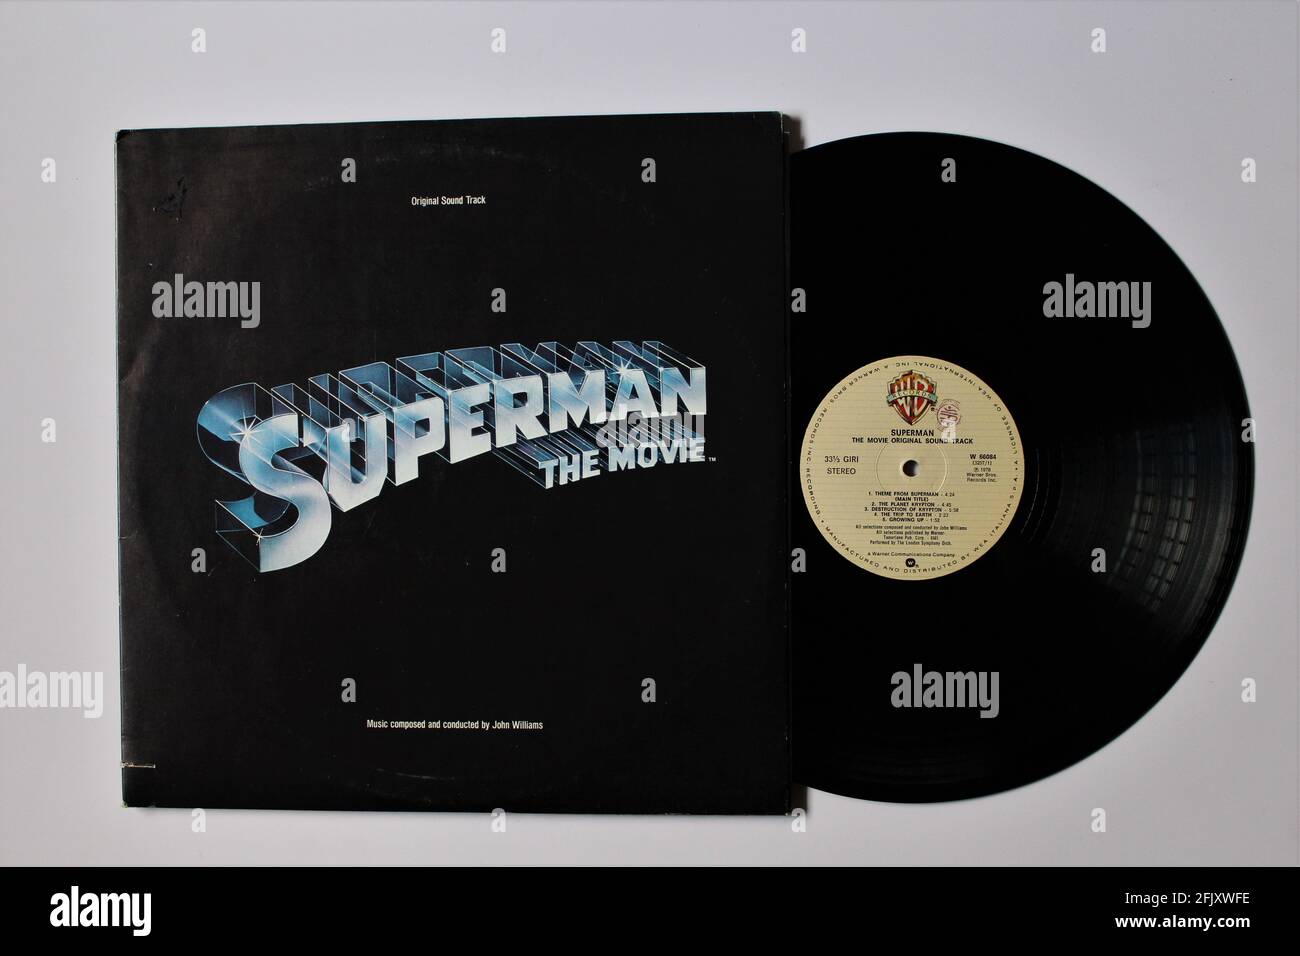 Superman The Movie Original Motion Picture Soundtrack on vinyl record LP disc album. Warner Brothers Records. Music by John Williams Stock Photo